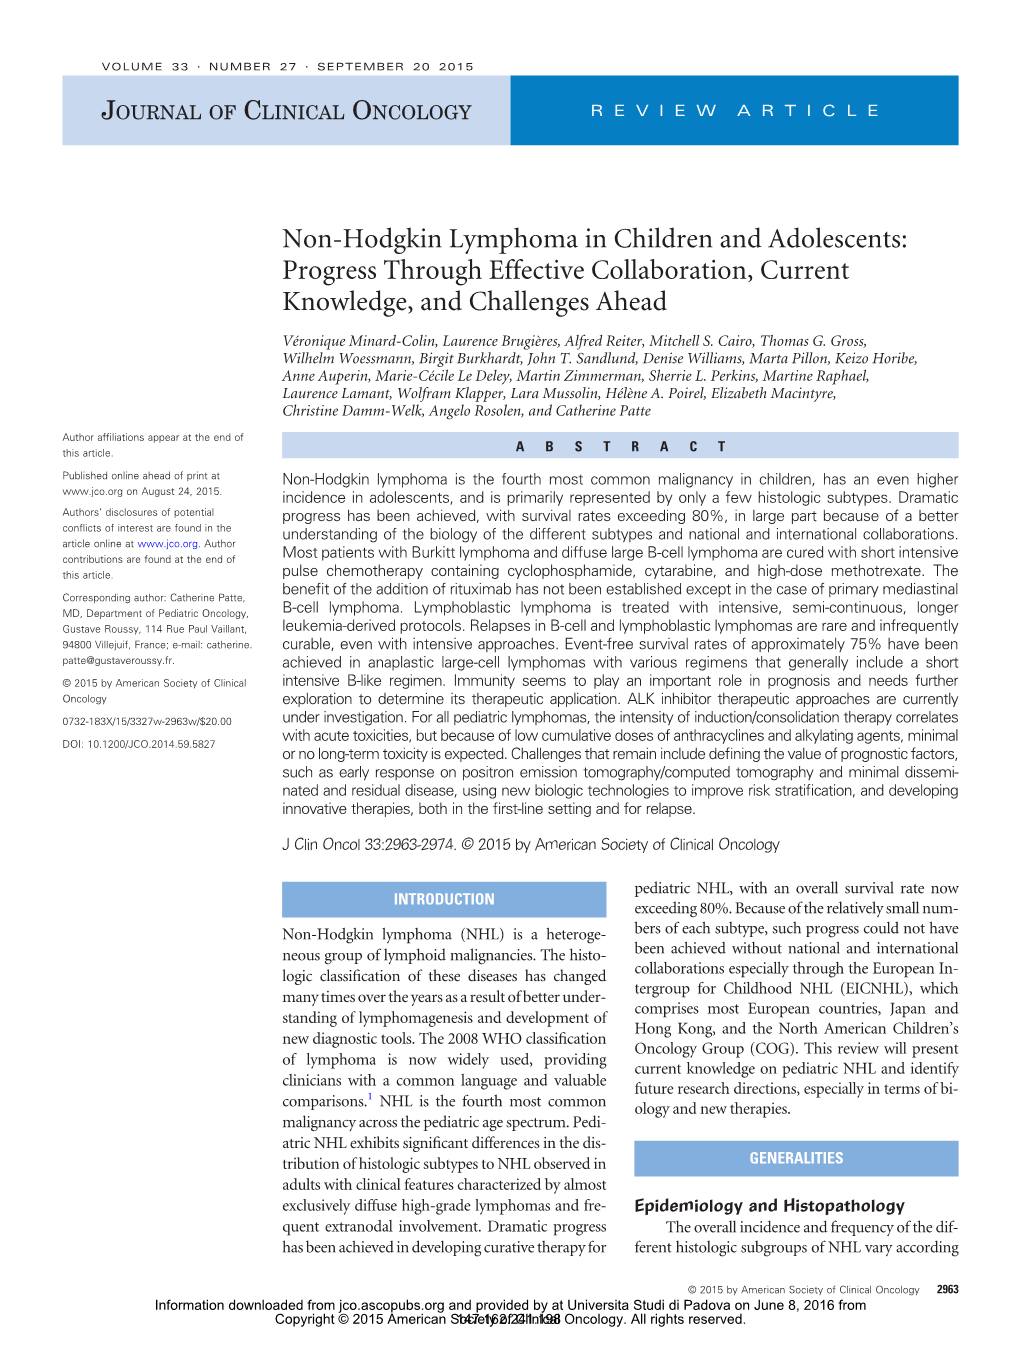 Non-Hodgkin Lymphoma in Children and Adolescents: Progress Through Effective Collaboration, Current Knowledge, and Challenges Ahead